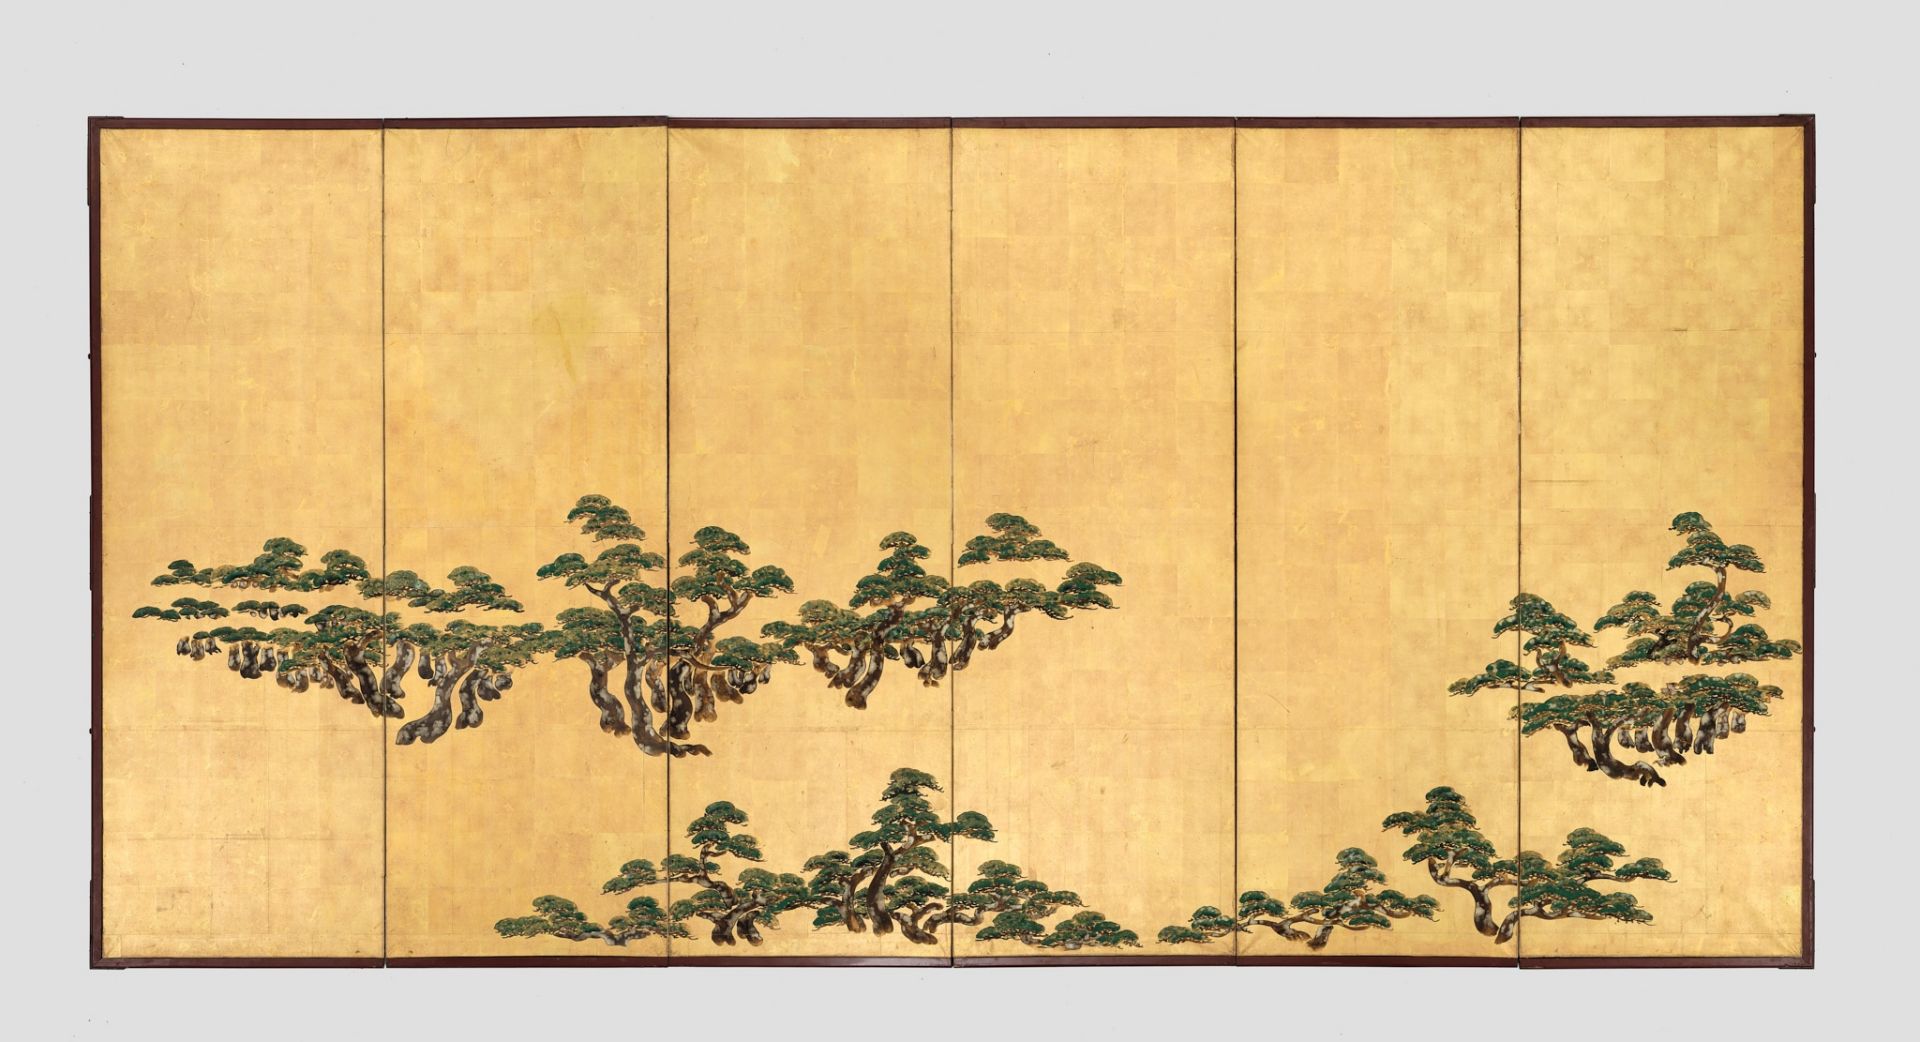 A FINE SIX-PANEL BYOBU SCREEN DEPICTING SNOW COVERED PINES